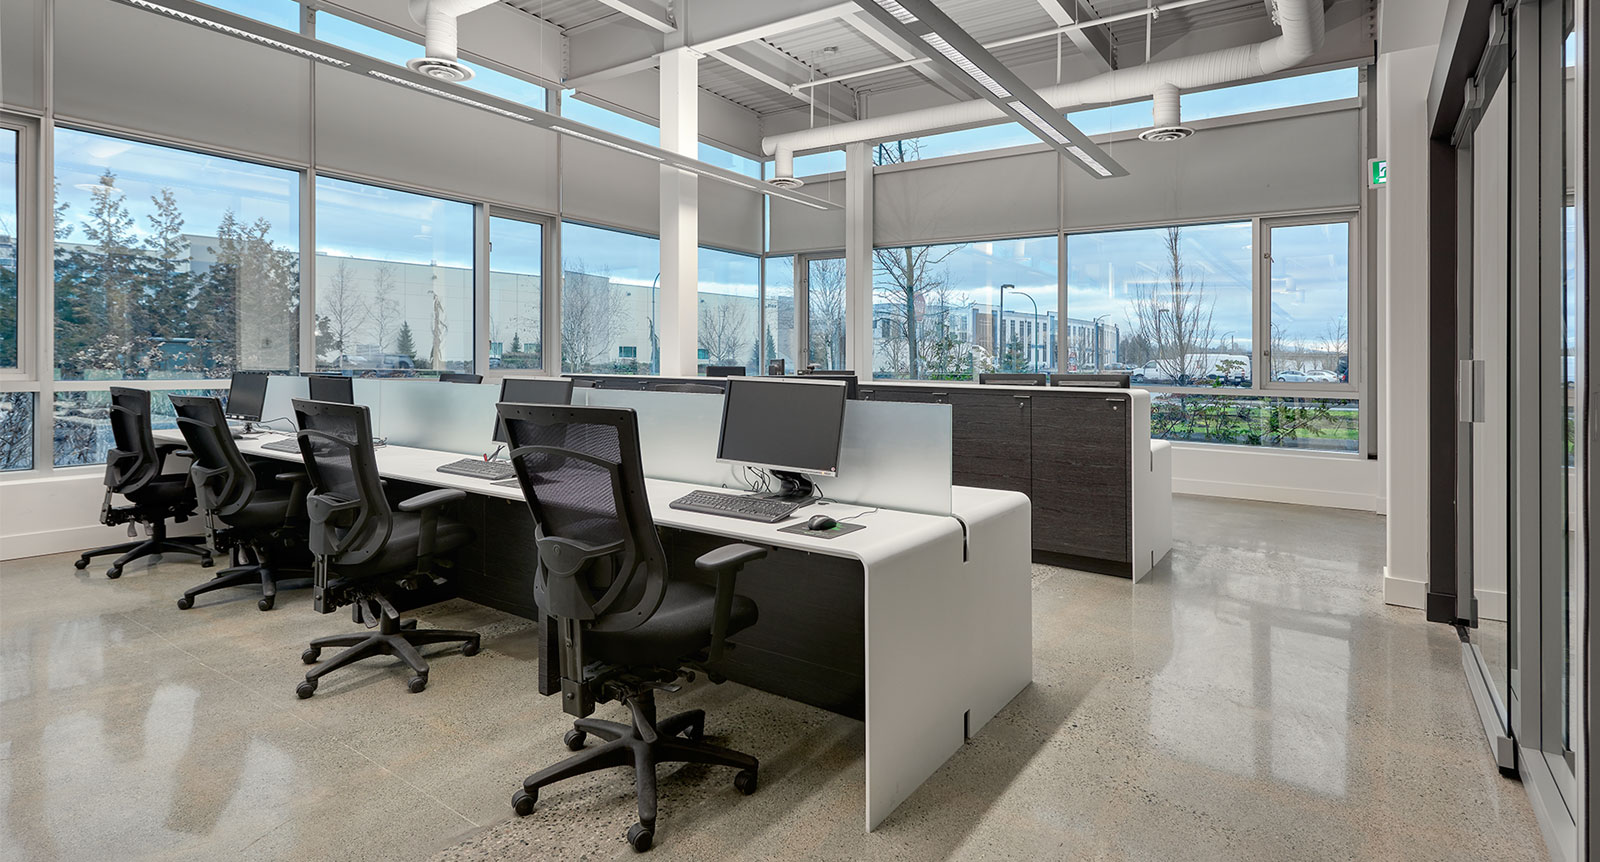 Upper Canada Vancouver Office Renovates Using Avonite, Polylac and Element Veneer